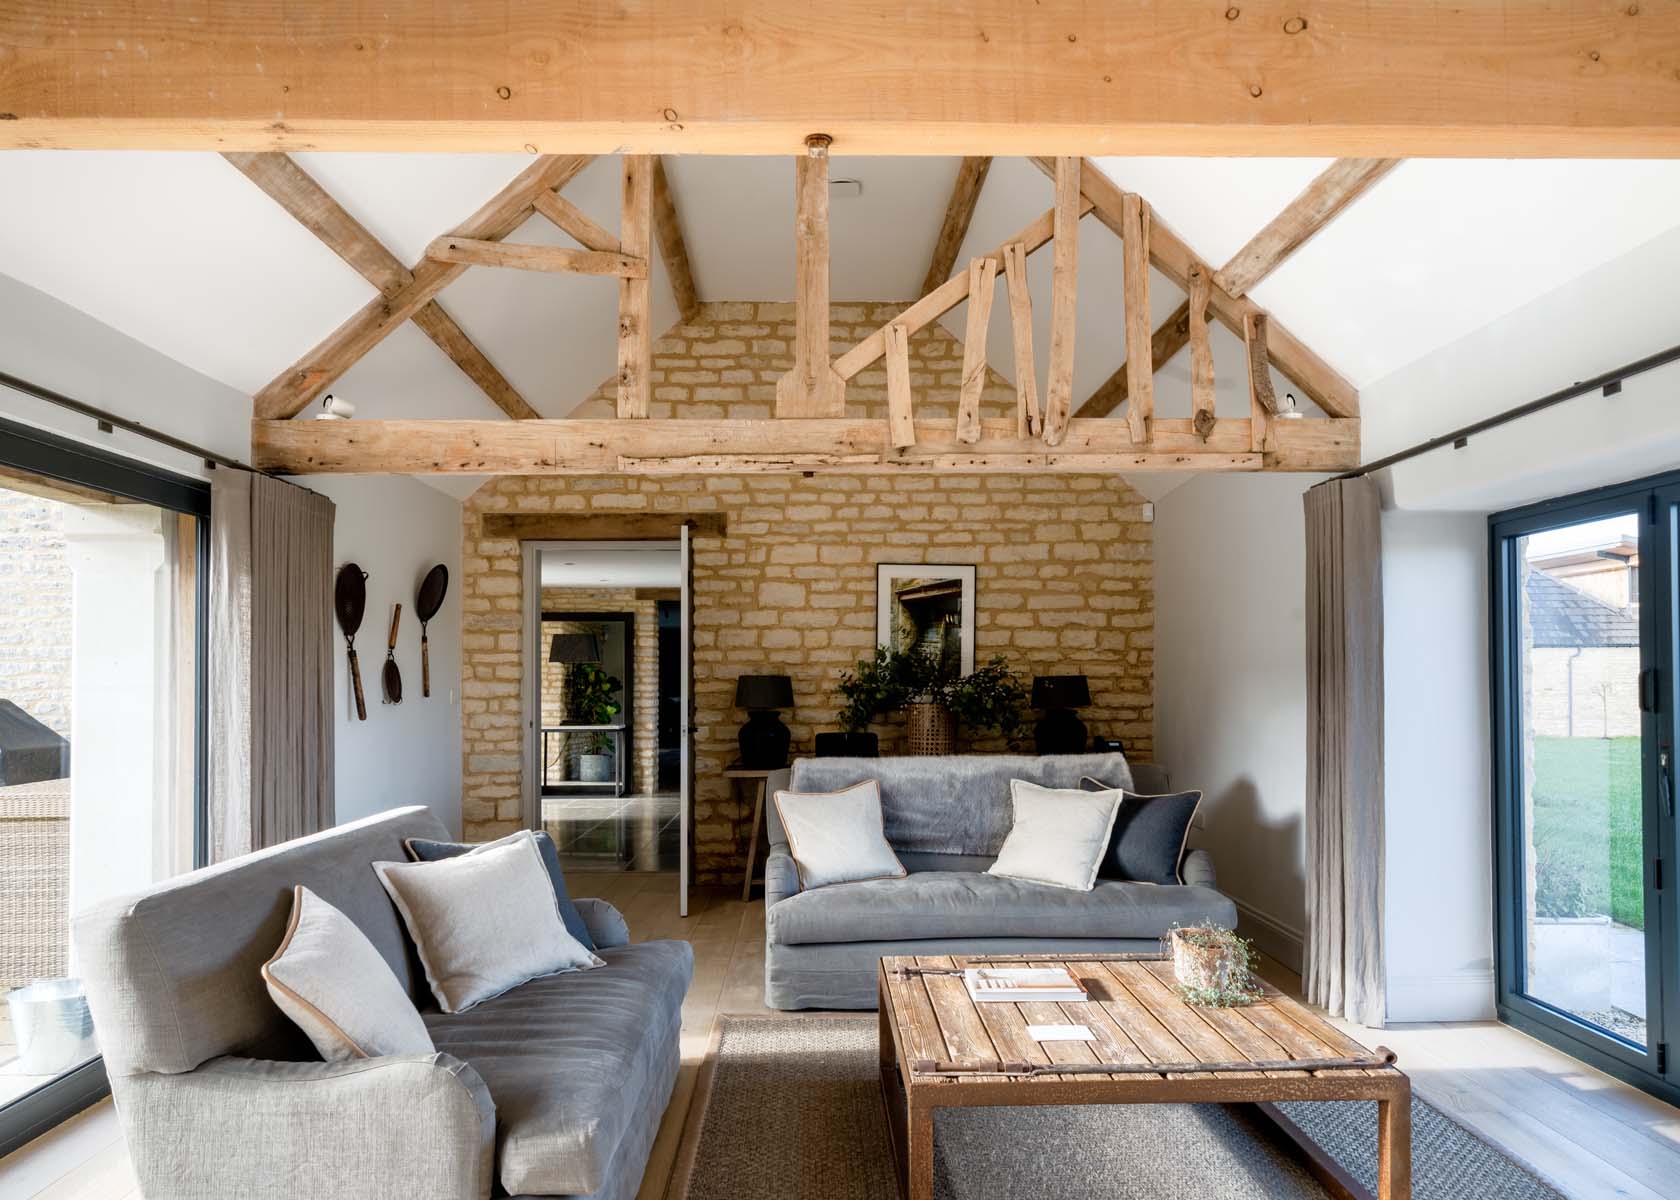 A living area with grey sofas and exposed wooden beams